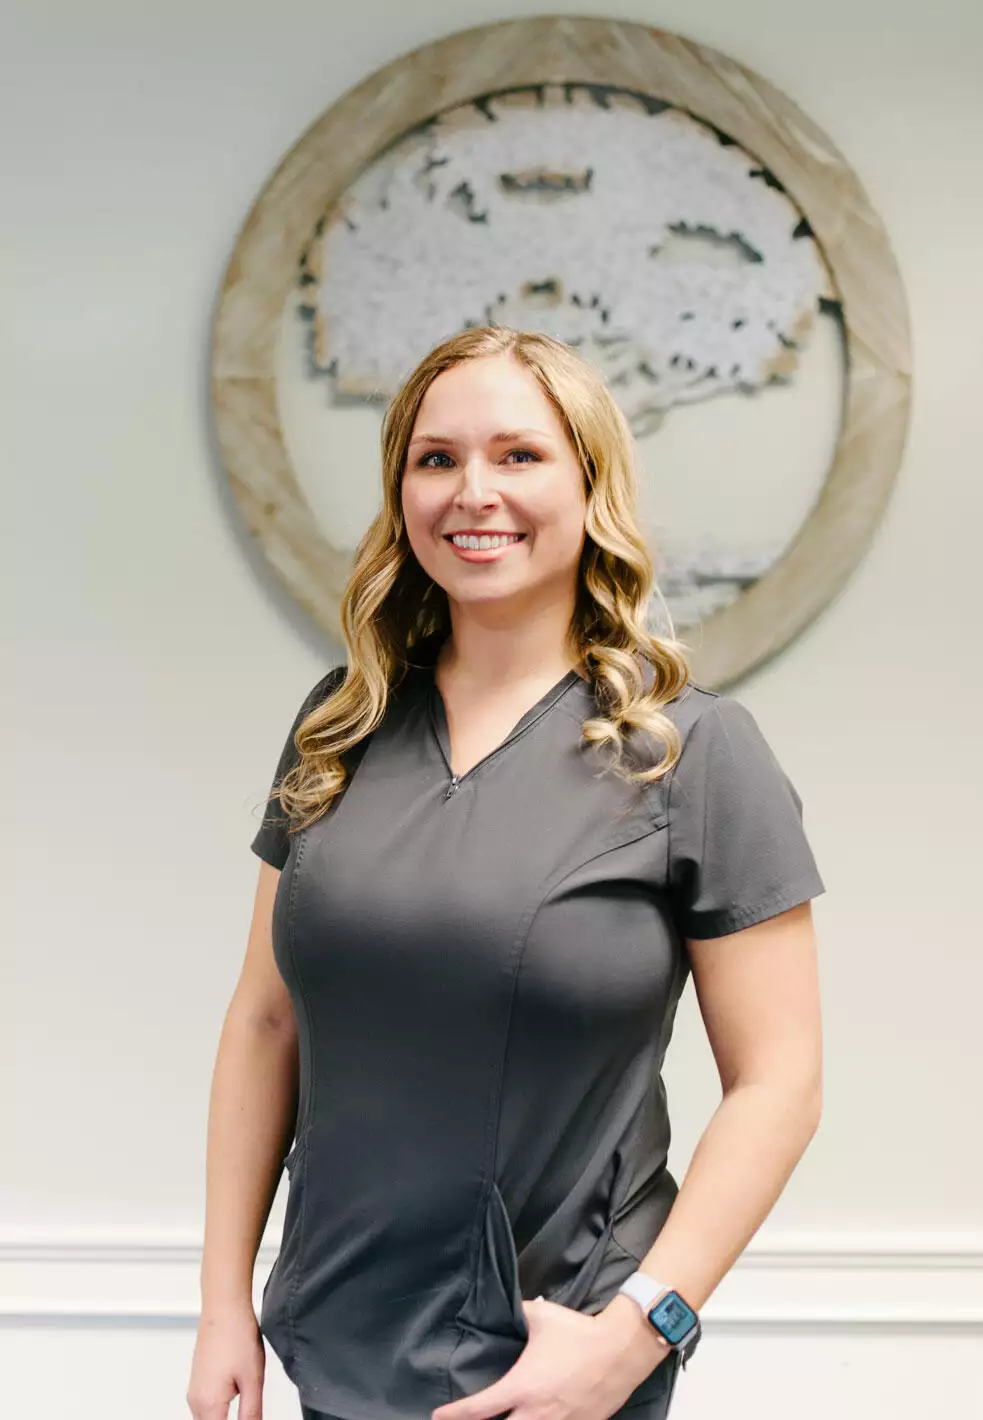 Professional portrait of Savannah Alder, a Family Nurse Practitioner at Living Tree Medical, in medical attire, representing her role and expertise in family healthcare.